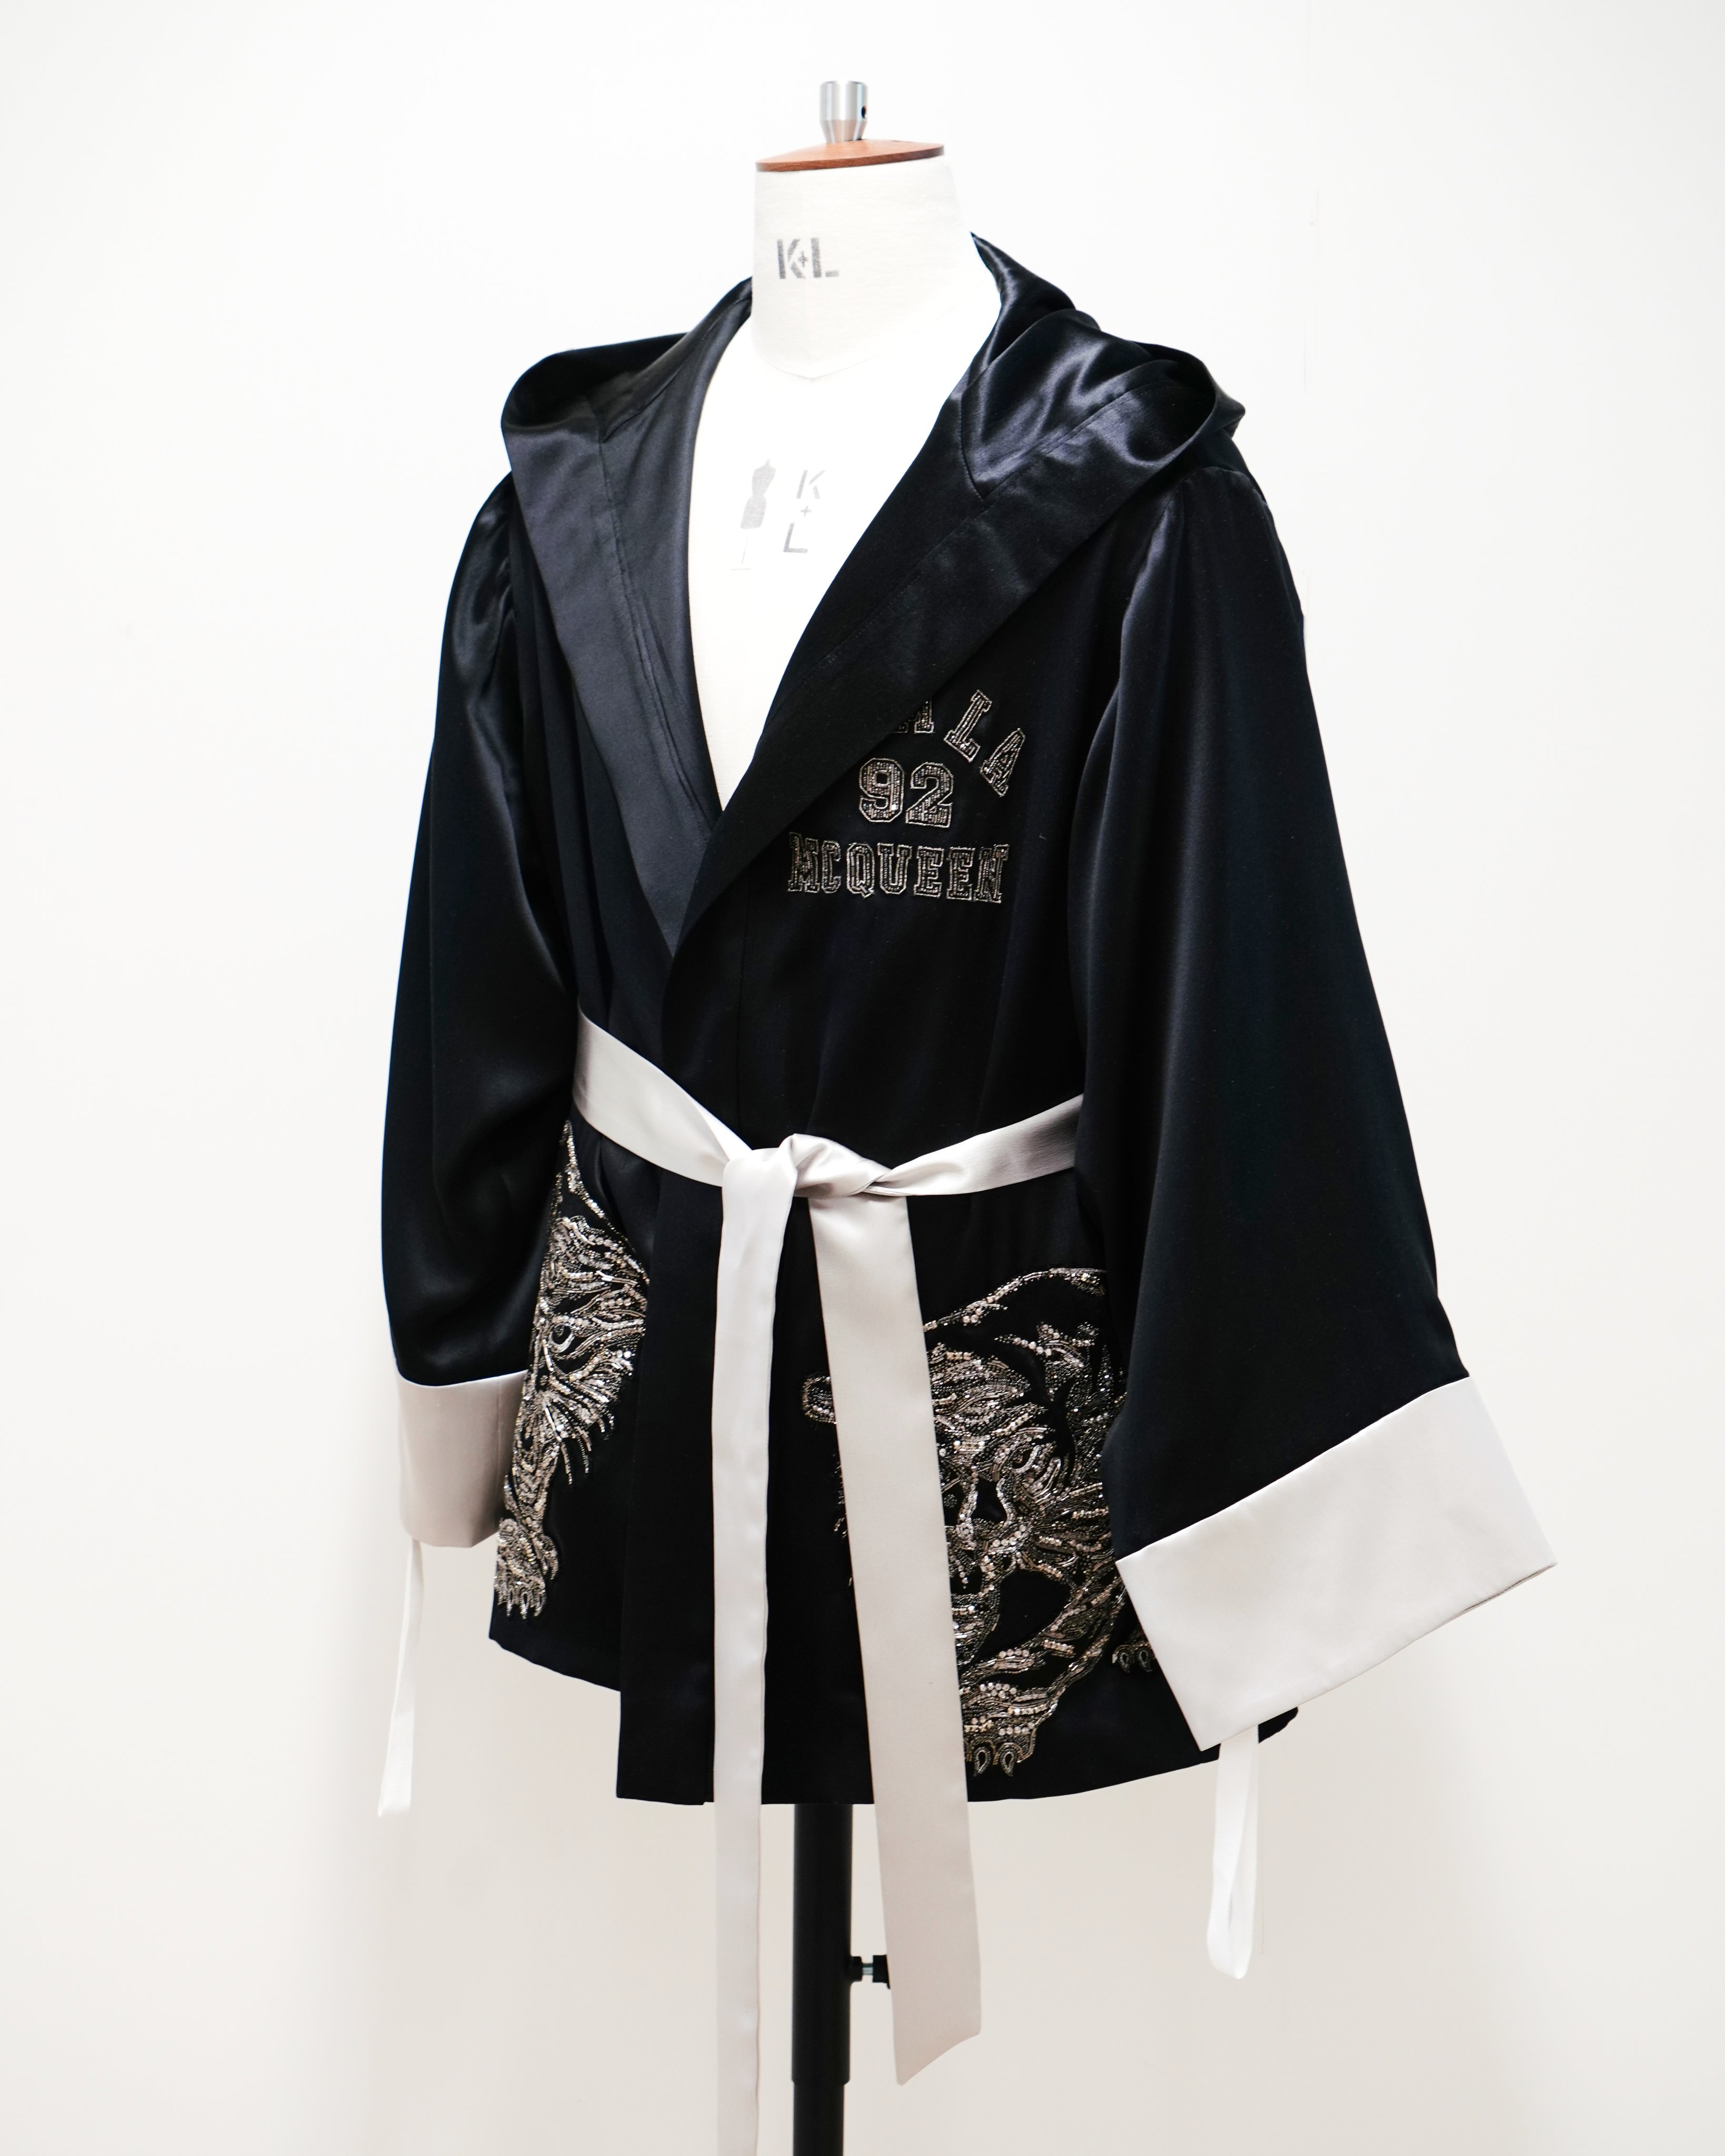 Alexander McQueen on X: @ramlaali Custom-made for #RamlaAli, captured  inside the London #McQueenAtelier. The hooded boxing robe was designed with  double-face silk satin and personalised crystal hand-embroidery for Ramla's  fight for the #